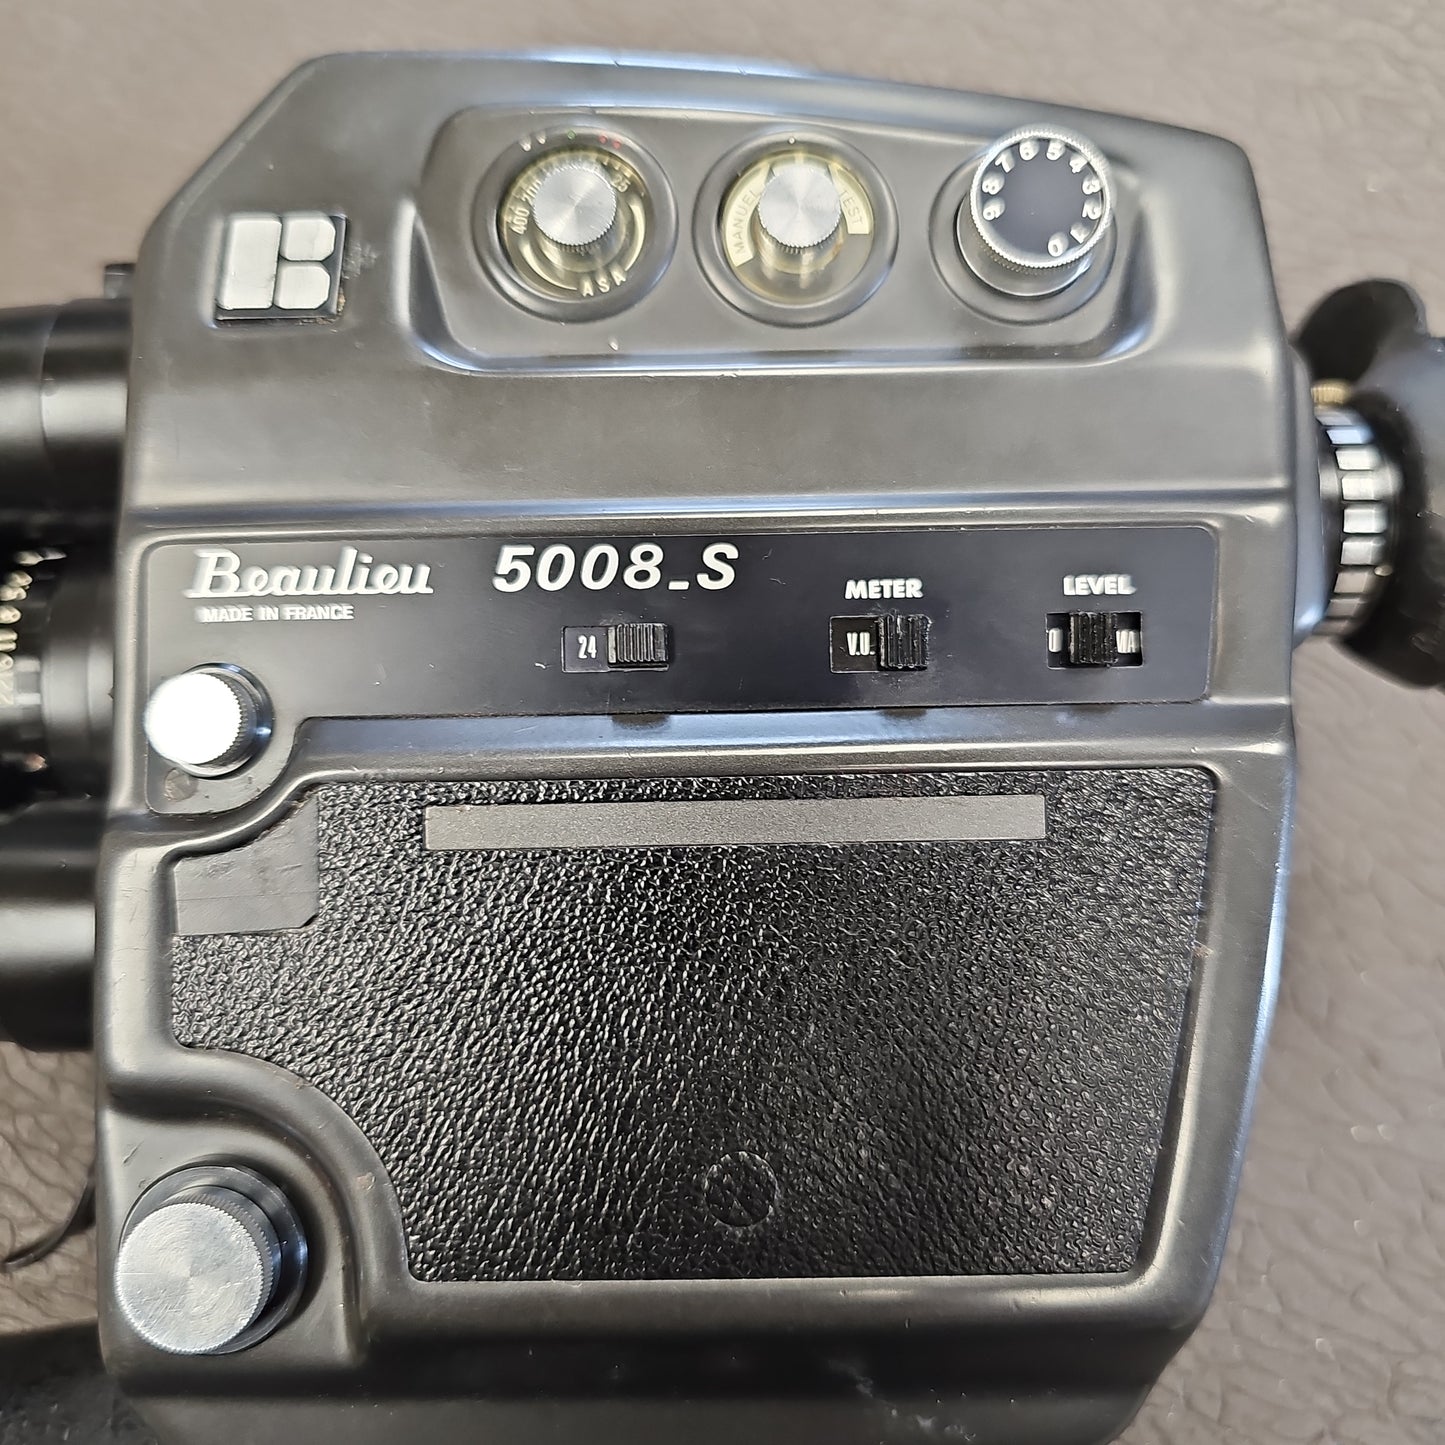 Beaulieu 5008.S Super 8mm Camera S#440769 with Angenieux 6-80mm T1.2 Zoom lens S# 1395785